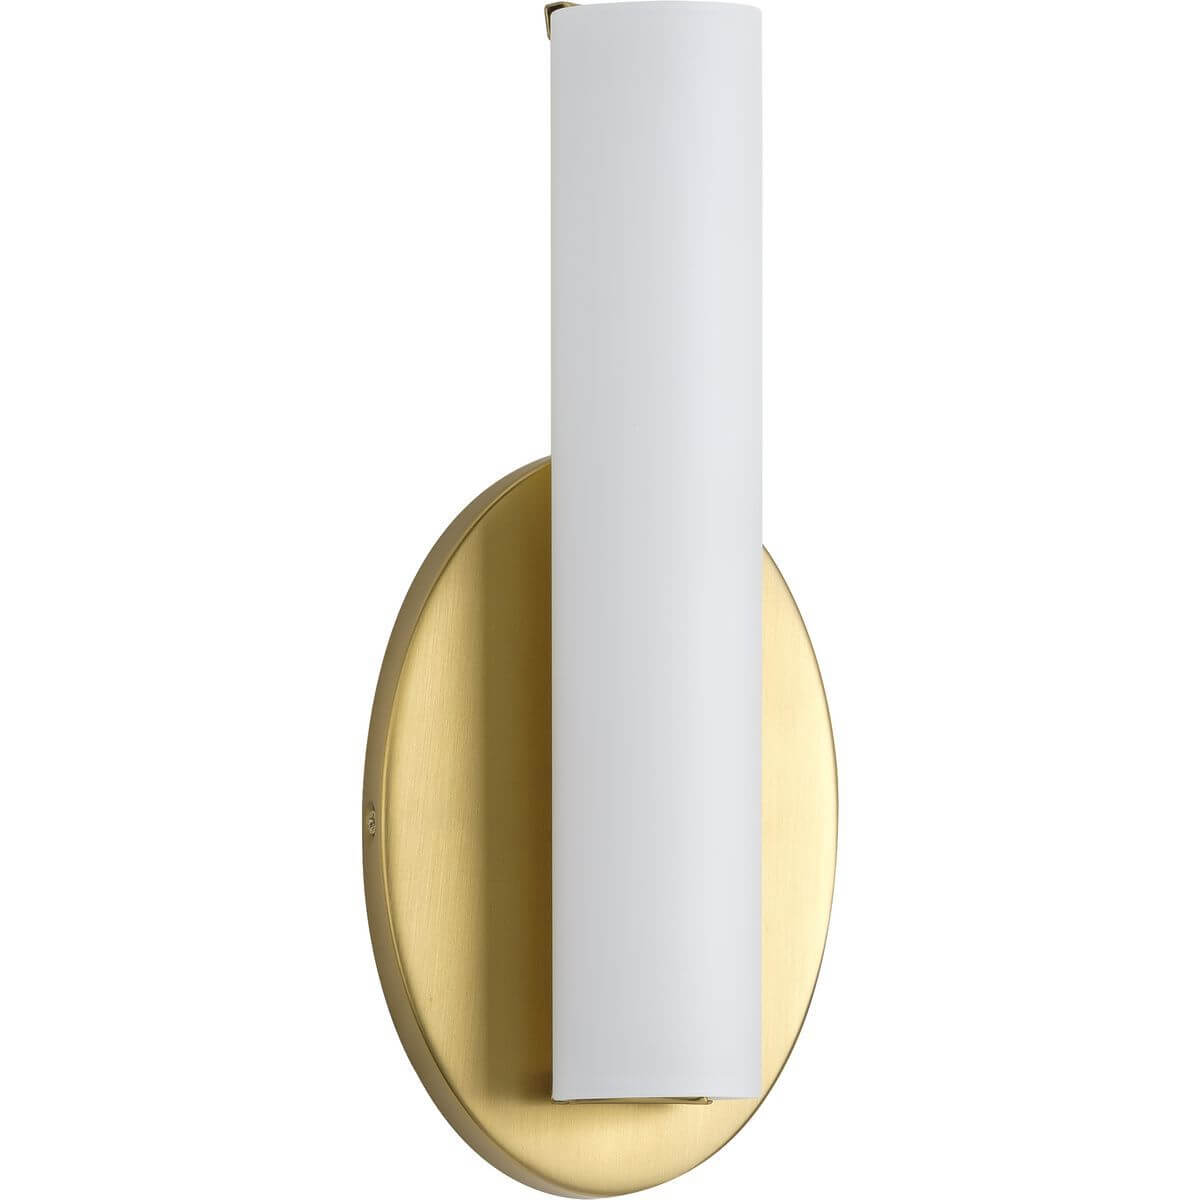 Progress Lighting Parallel 11 inch Tall LED Wall Bracket in Satin Brass with Etched White Glass Shade P710050-012-30